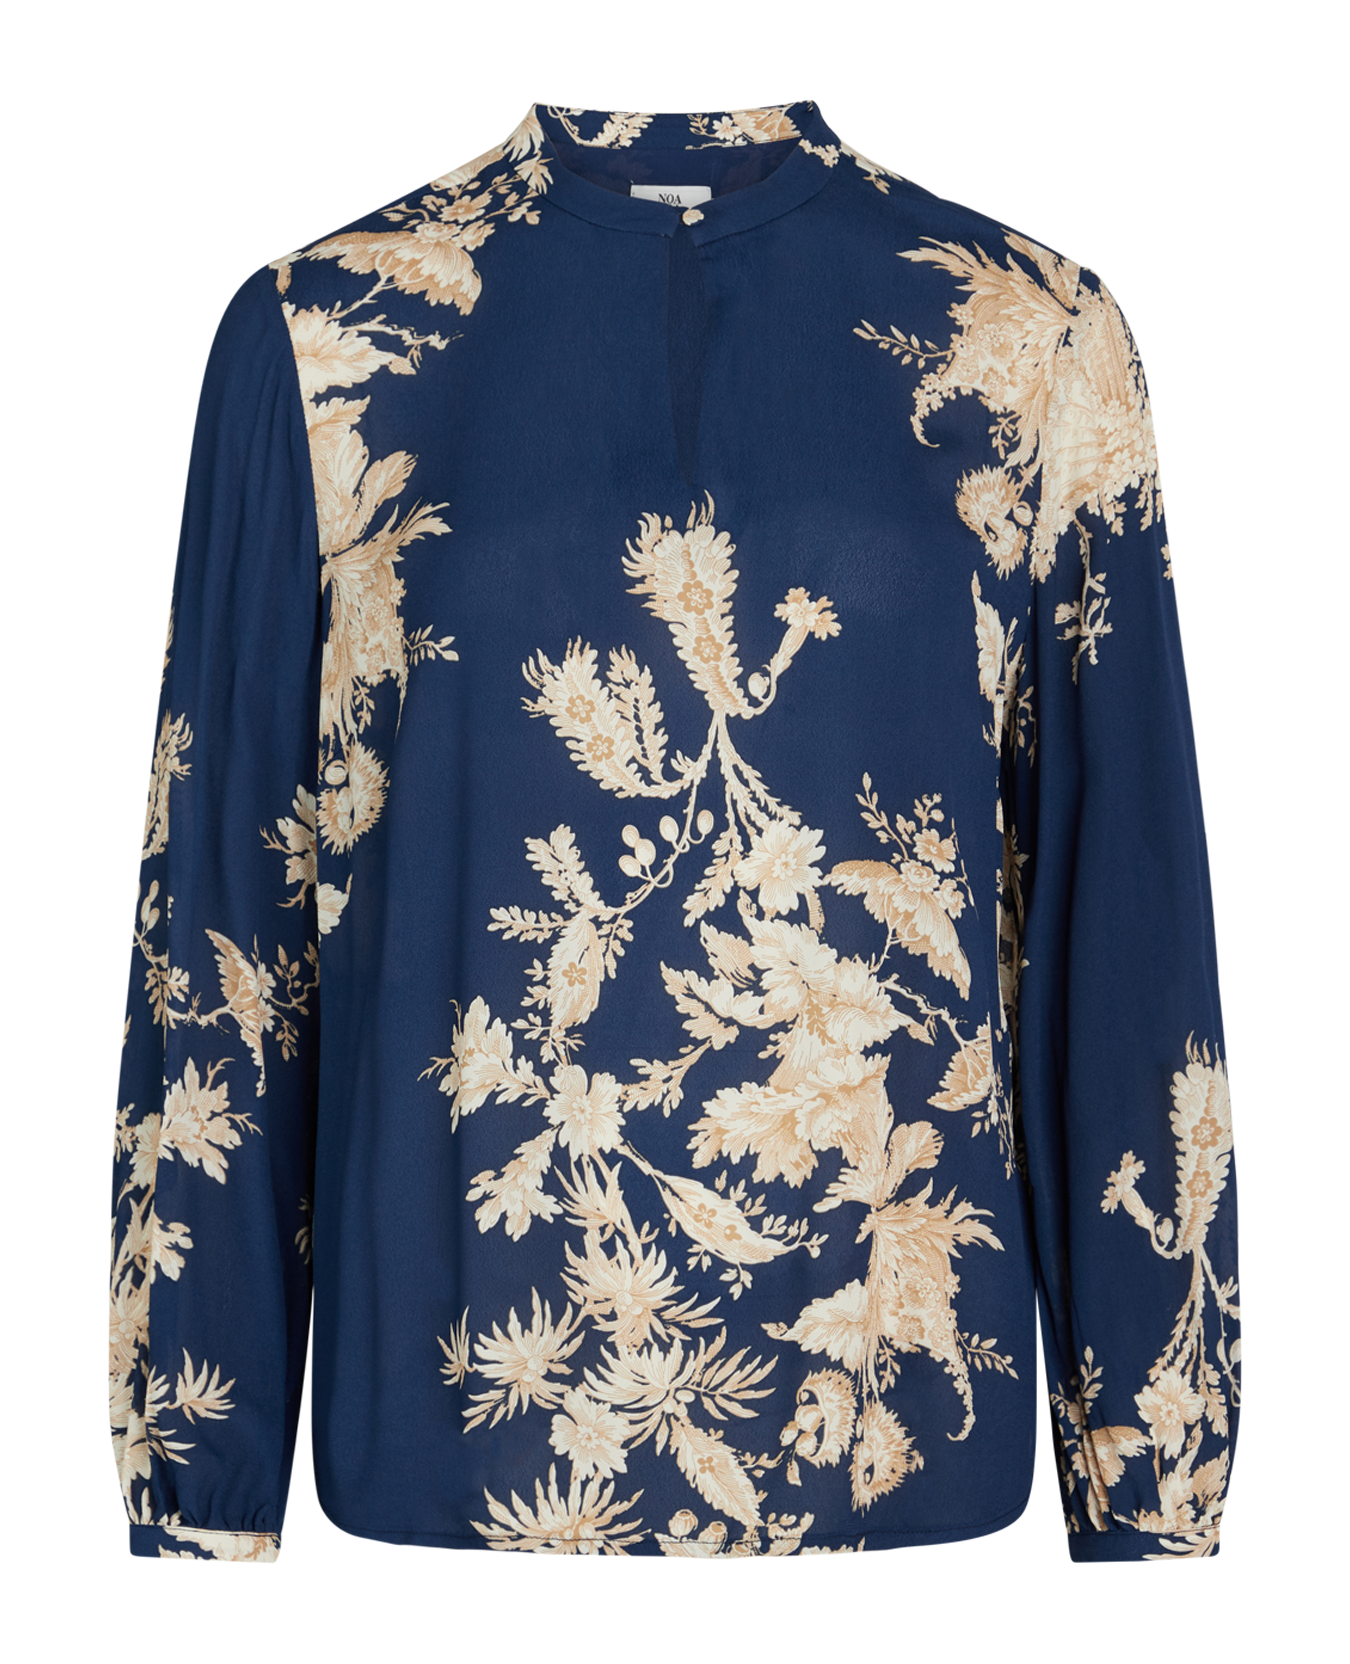 Noa Noa Philippa blouse in statement floral print, white on deep blue.